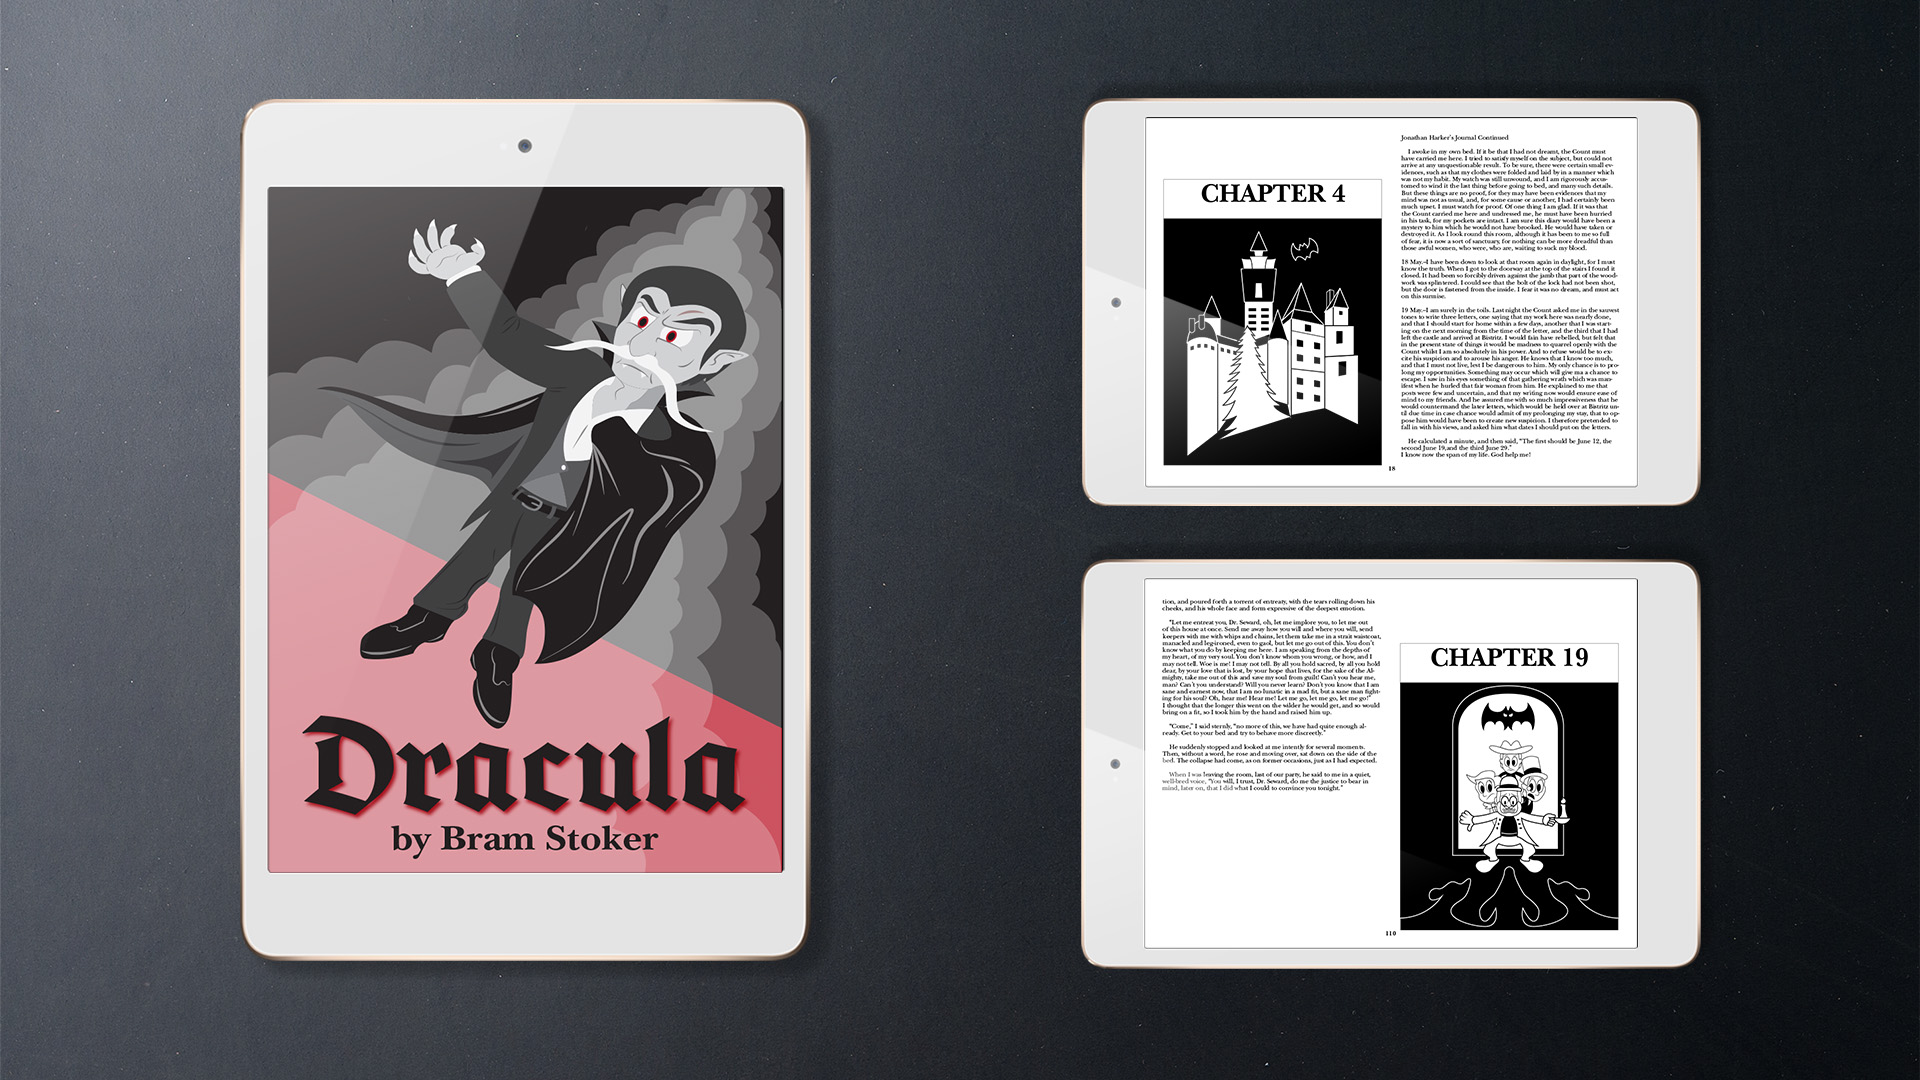 Dracula E-Book / ”Dracula E-Book,” ebook, digital publication for book app, 2022. This is an ebook retelling of “Dracula” by Bram Stoker. Each chapter displays an illustration reflecting scenes that take place in each chapter.